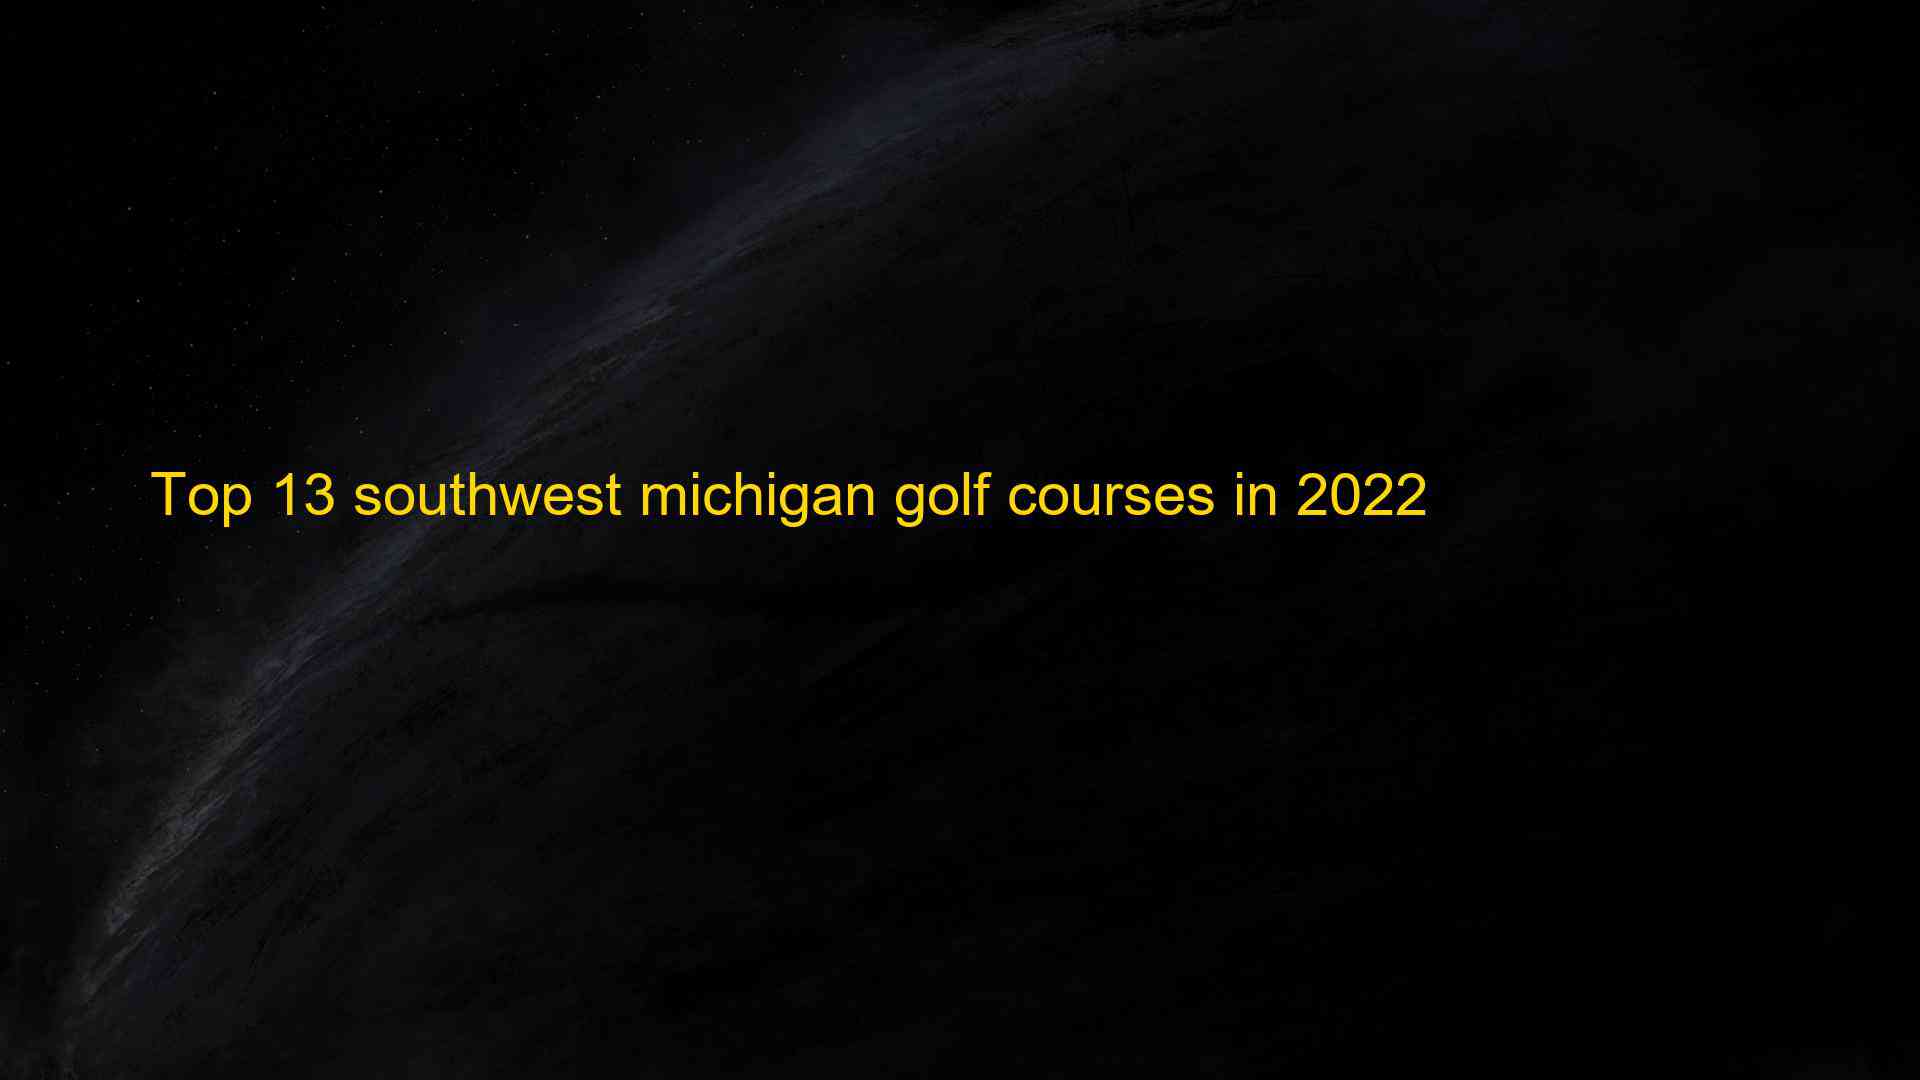 Top 13 southwest michigan golf courses in 2022 1660875477